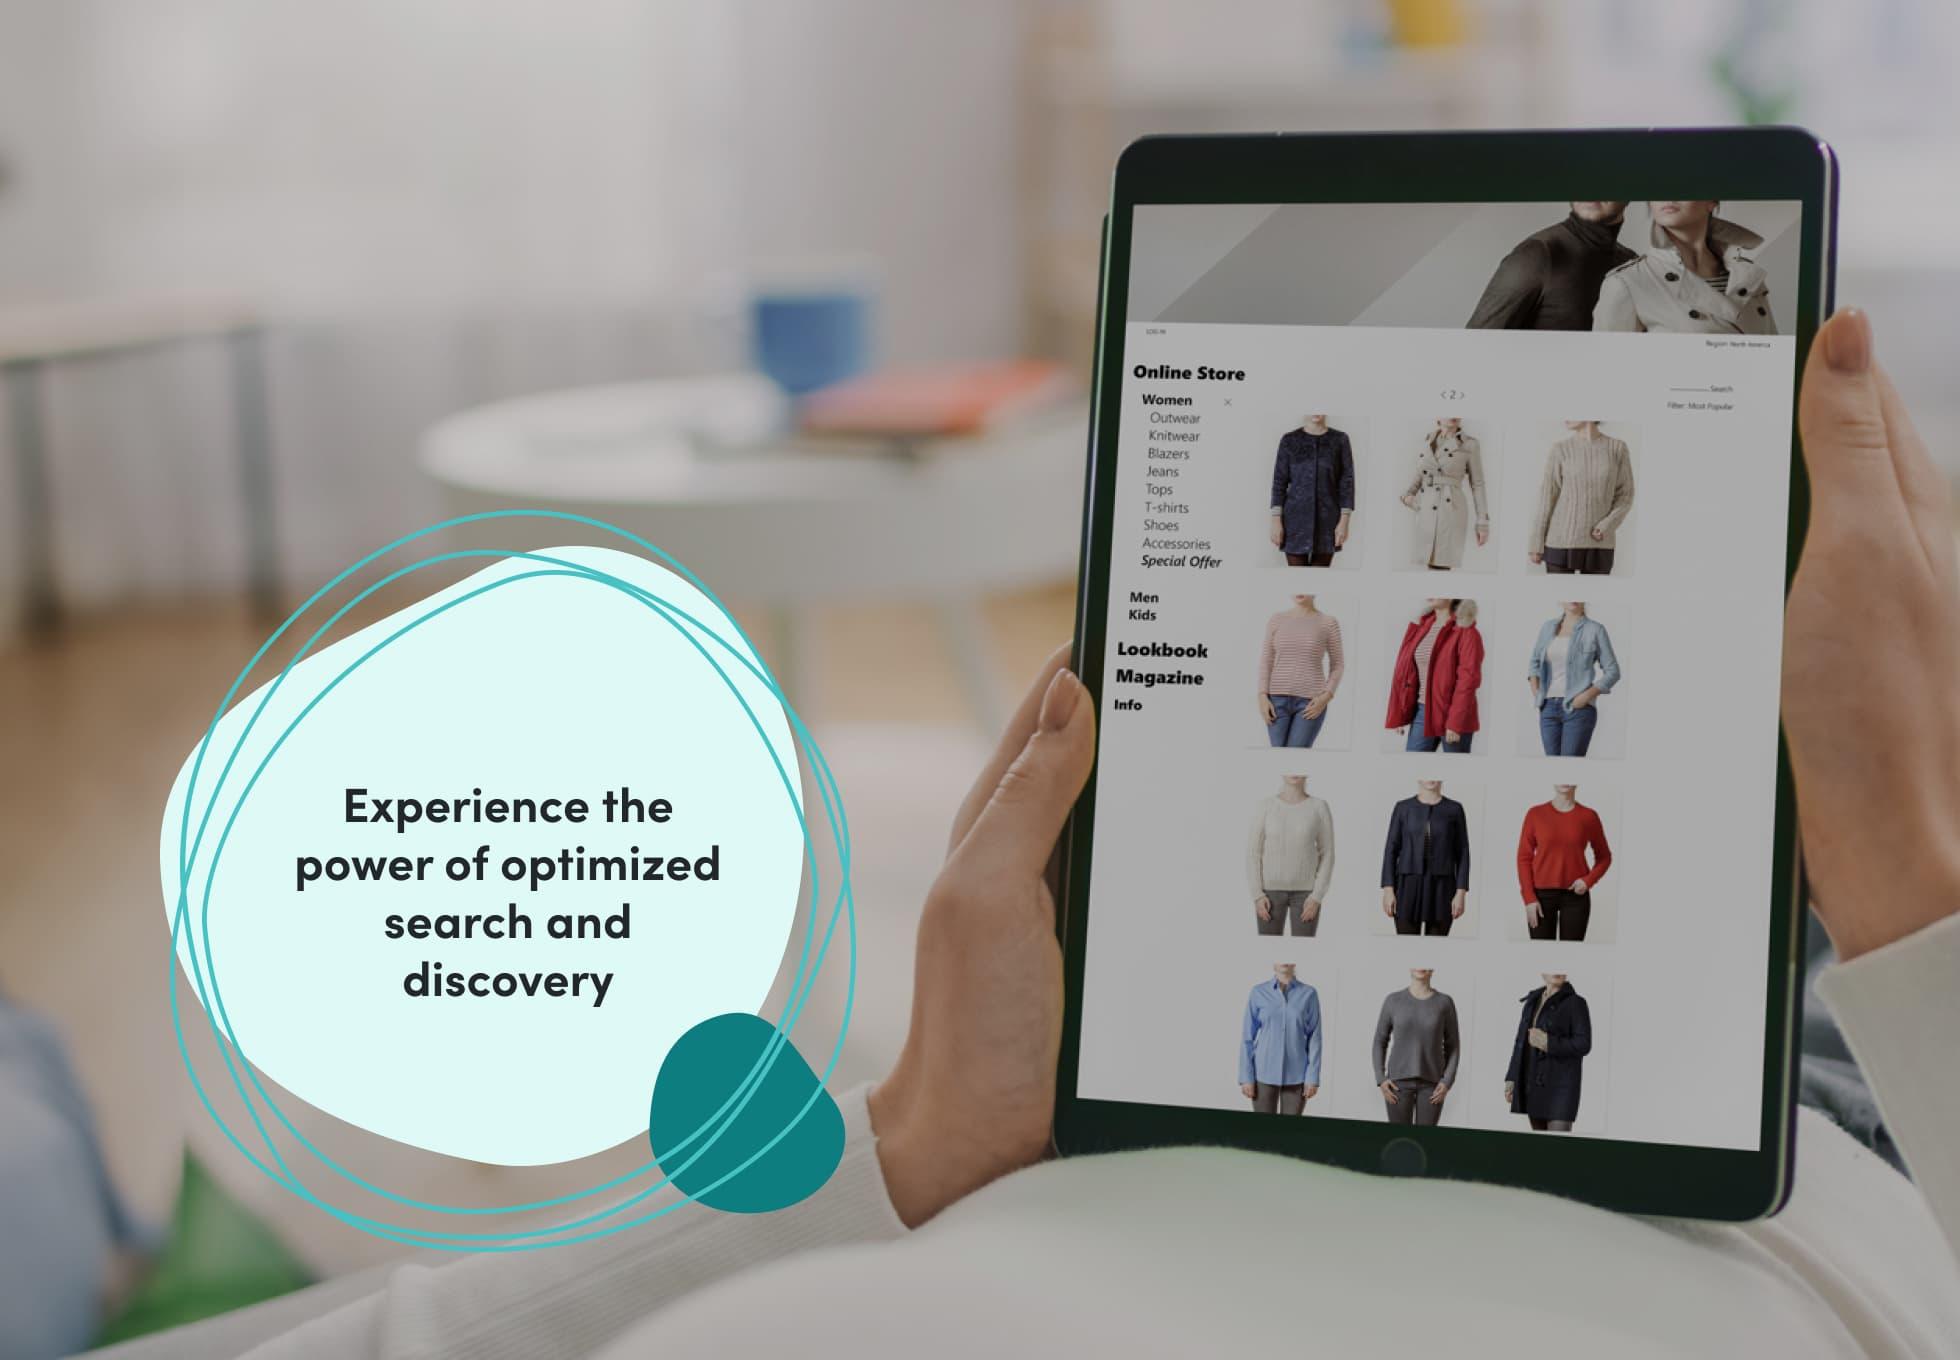 Person holding an iPad with a womenswear commerce site on the display, showing categories of clothing. Overtop this image says "Experience the power of optimized search and discovery."